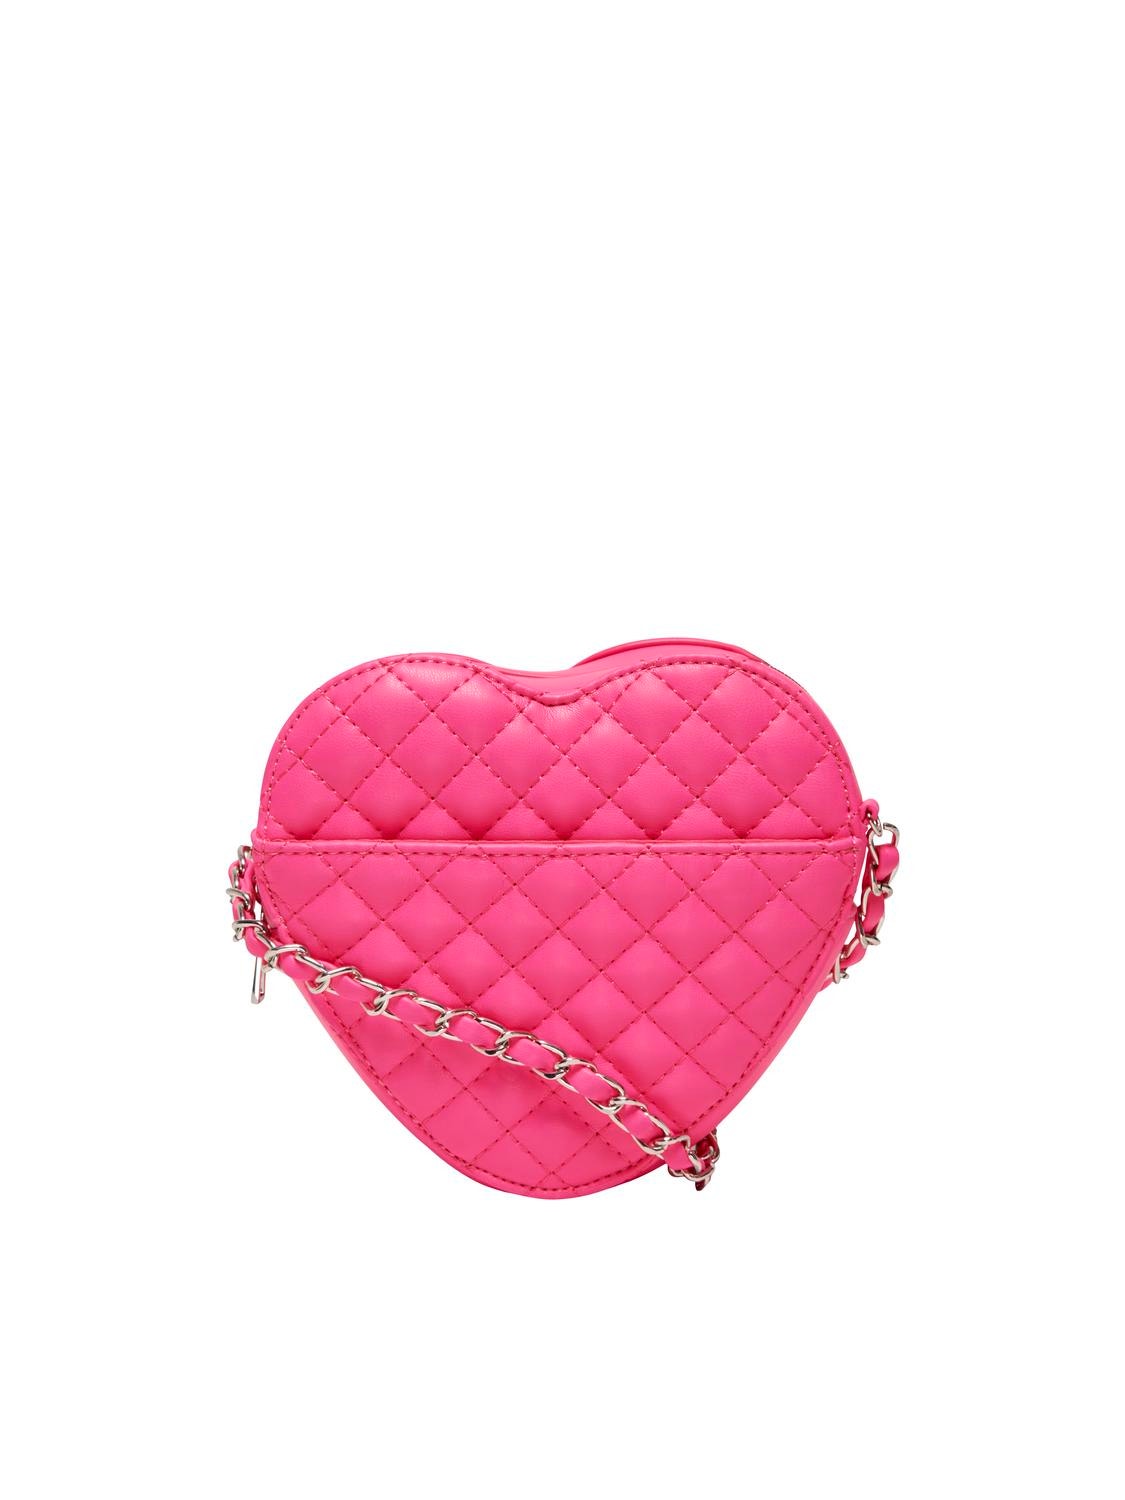 ONLY Chain strap Cross Over -Pink Glo - 15318284